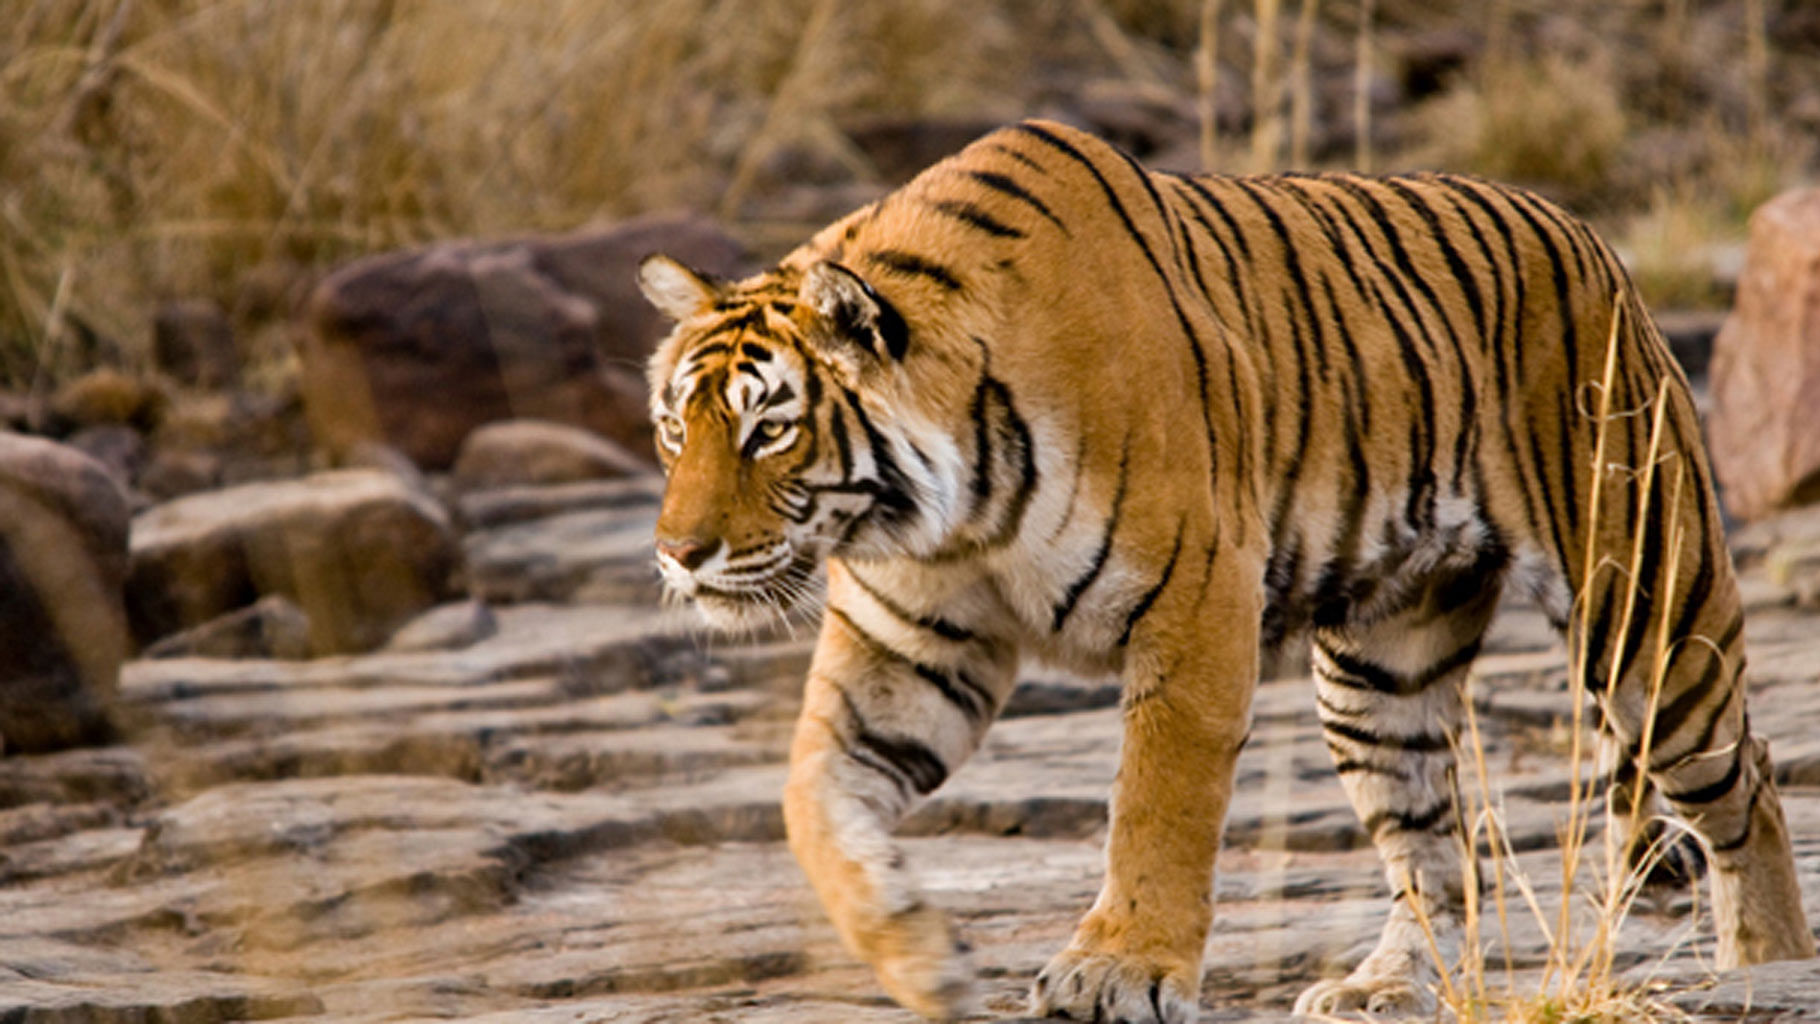 Machli has earned the distinction of being the world’s oldest tigress in the wild. (Coutesy: <a href="http://www.ranthamborenationalpark.com/blog/wp-content/uploads/2014/11/Machli-Tigress-Ranthambore.jpg">www.ranthamborenationalpark.com</a>)